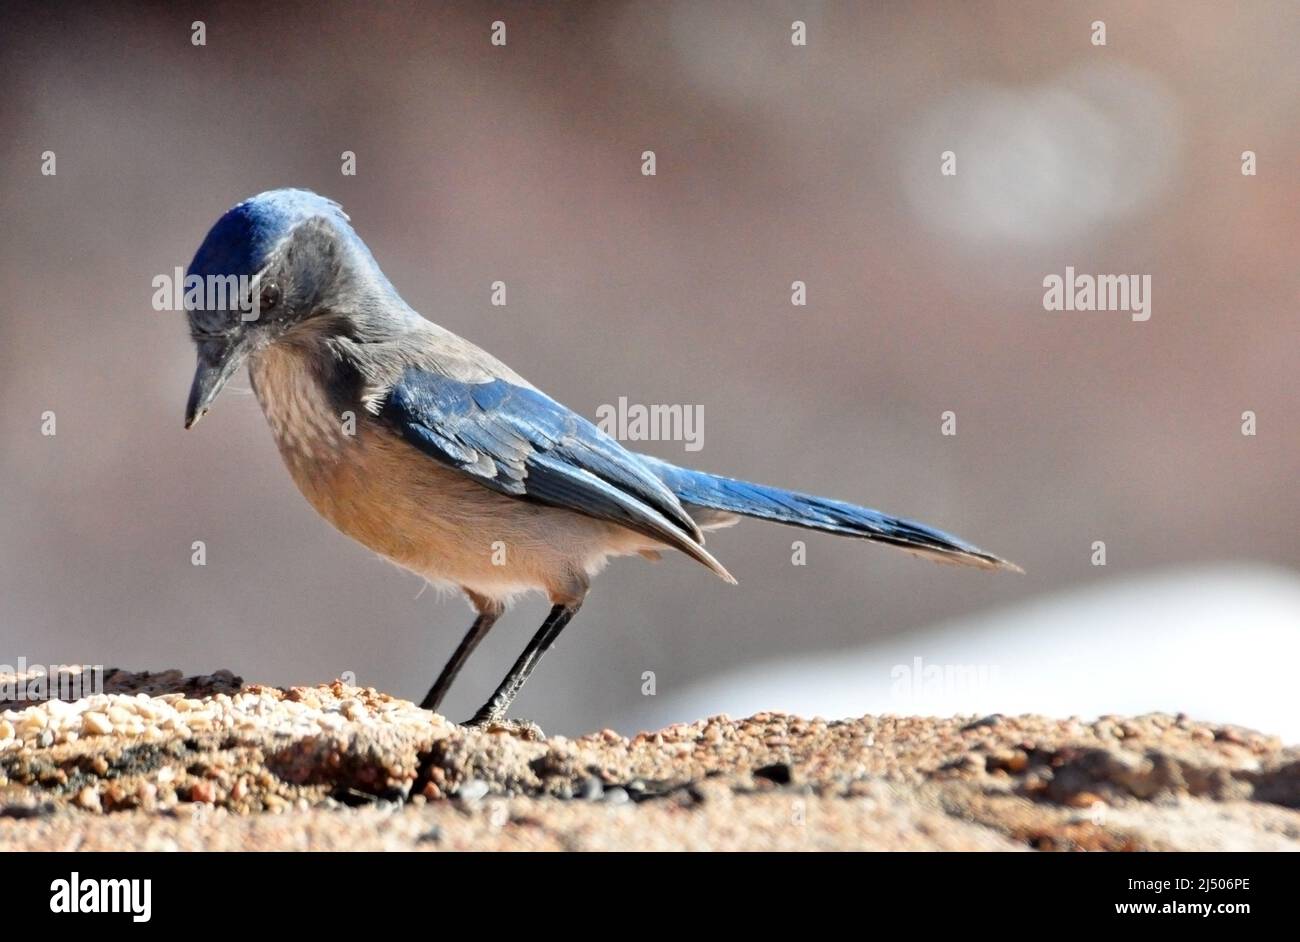 Woodhouse's scrub jay perched on stone wall Stock Photo